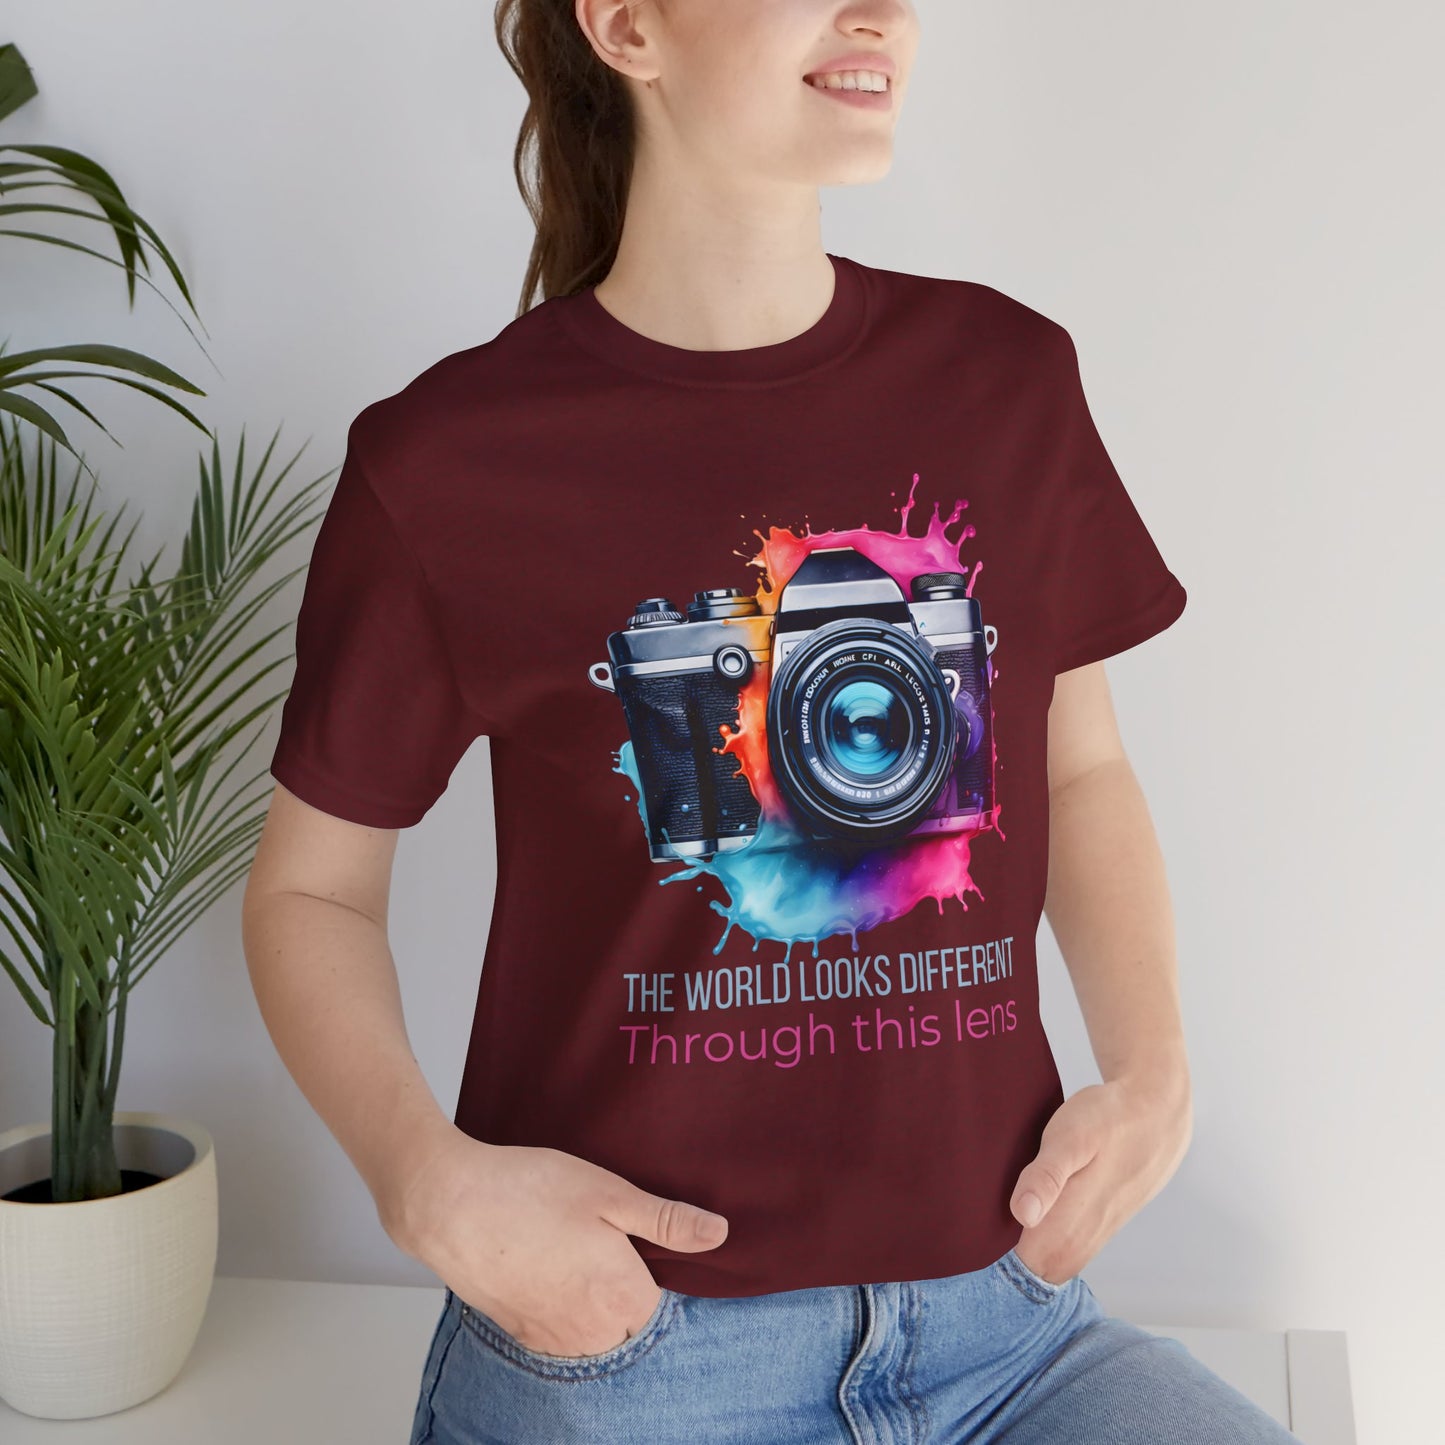 Tee Shirt for Photographer, Great gift for a photographer, Photography